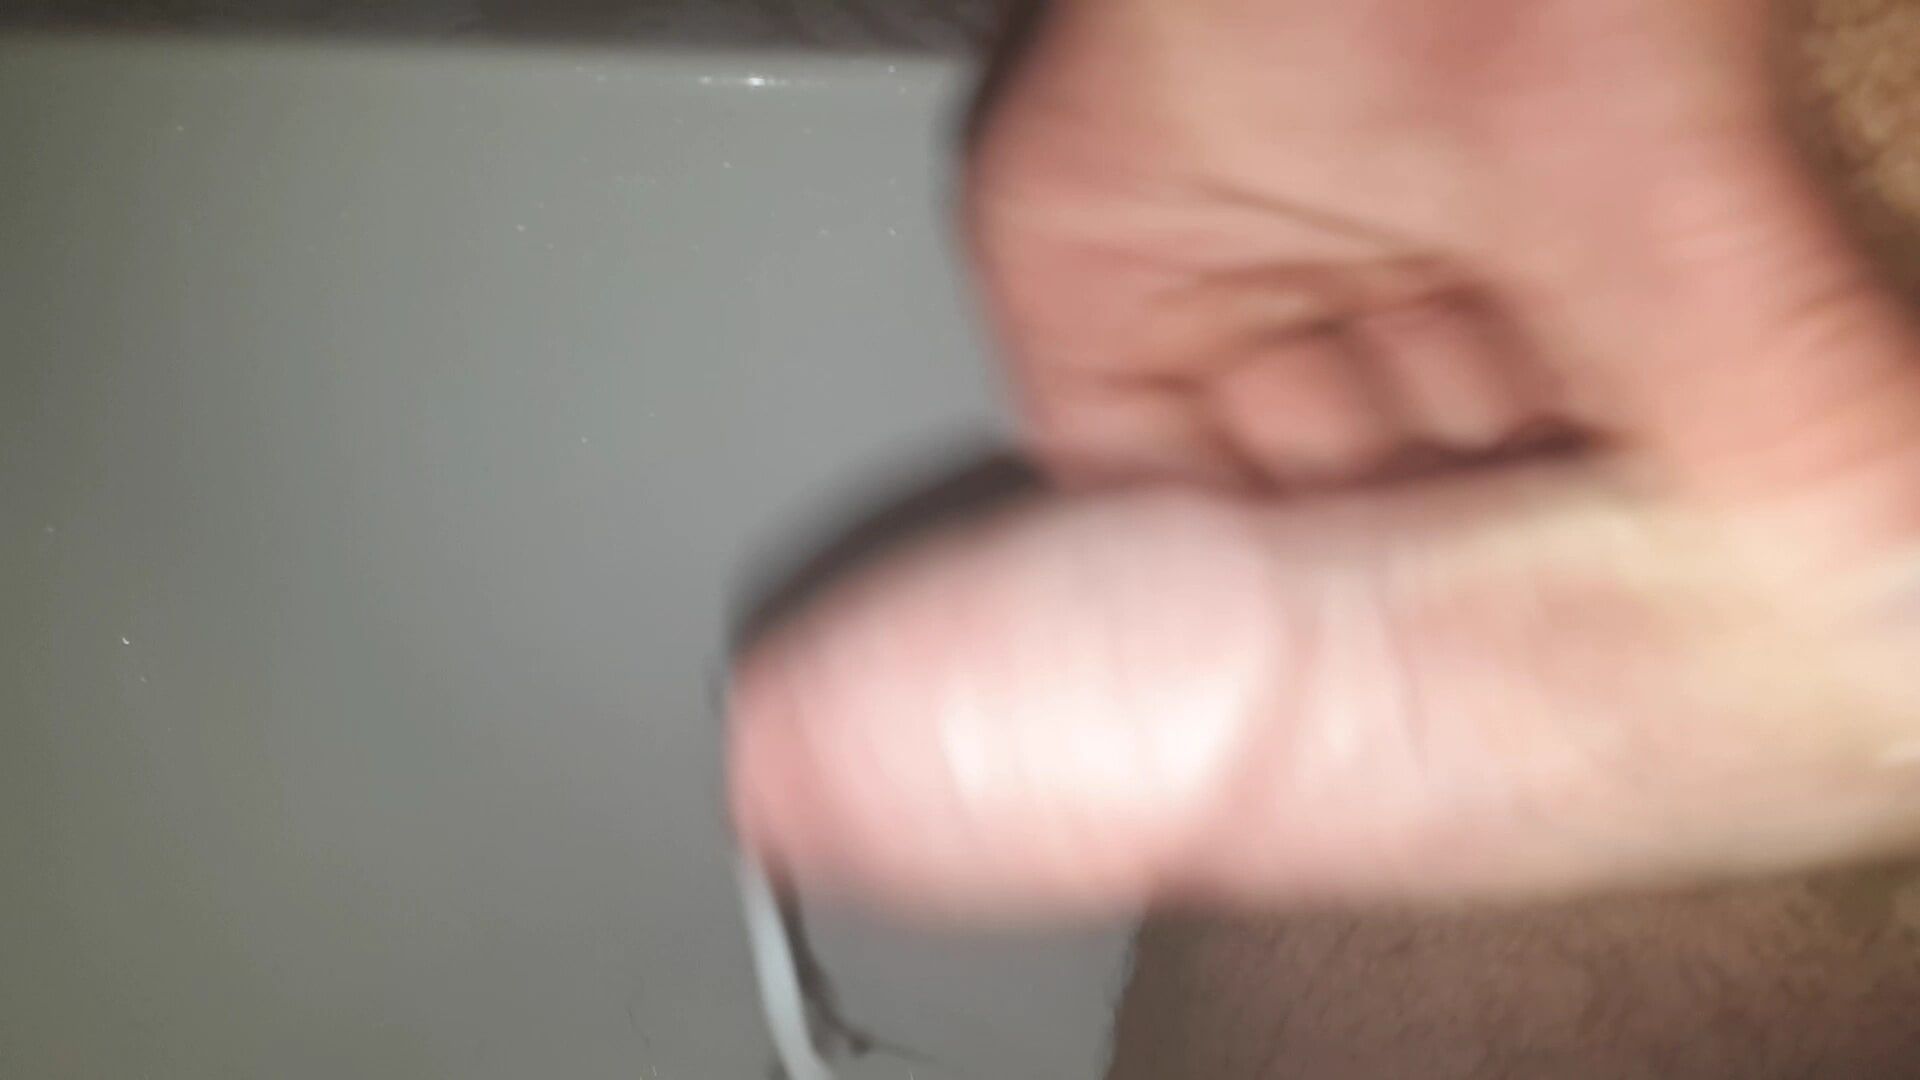 my uncut cock shooting its load #6